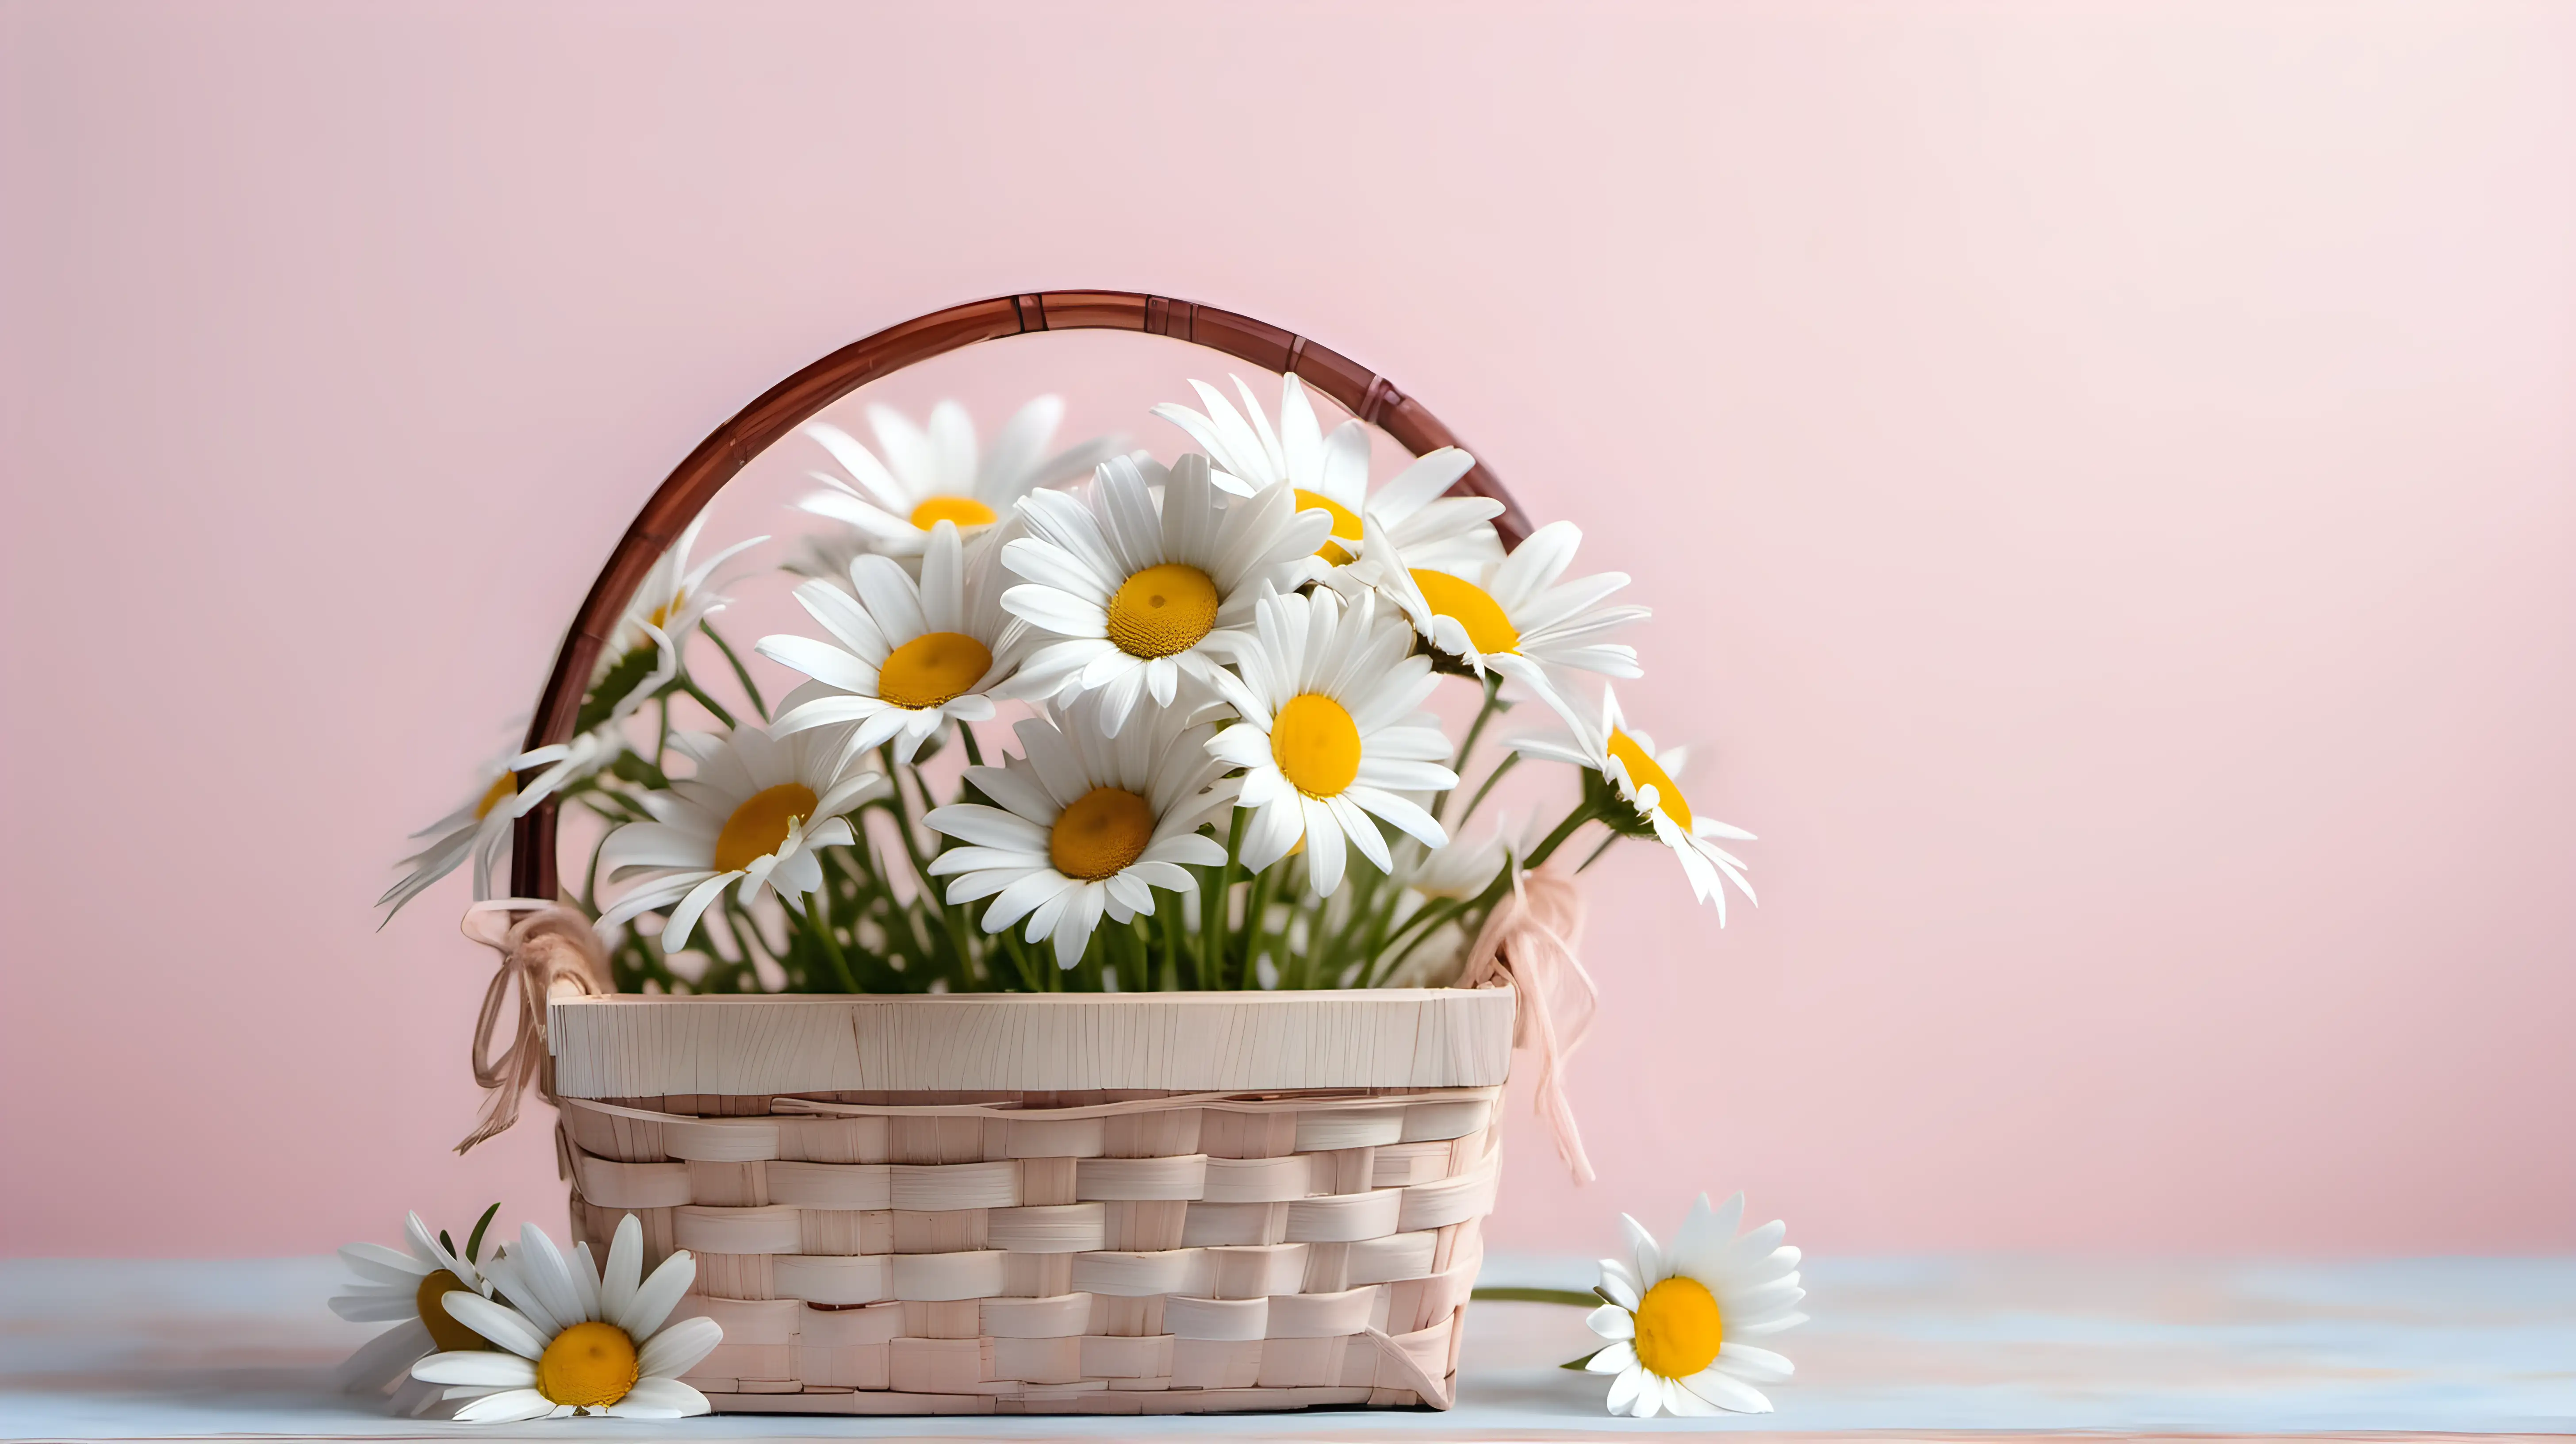 Charming White Daisy Flowers in Wooden Basket on Soft Pink Spring Background